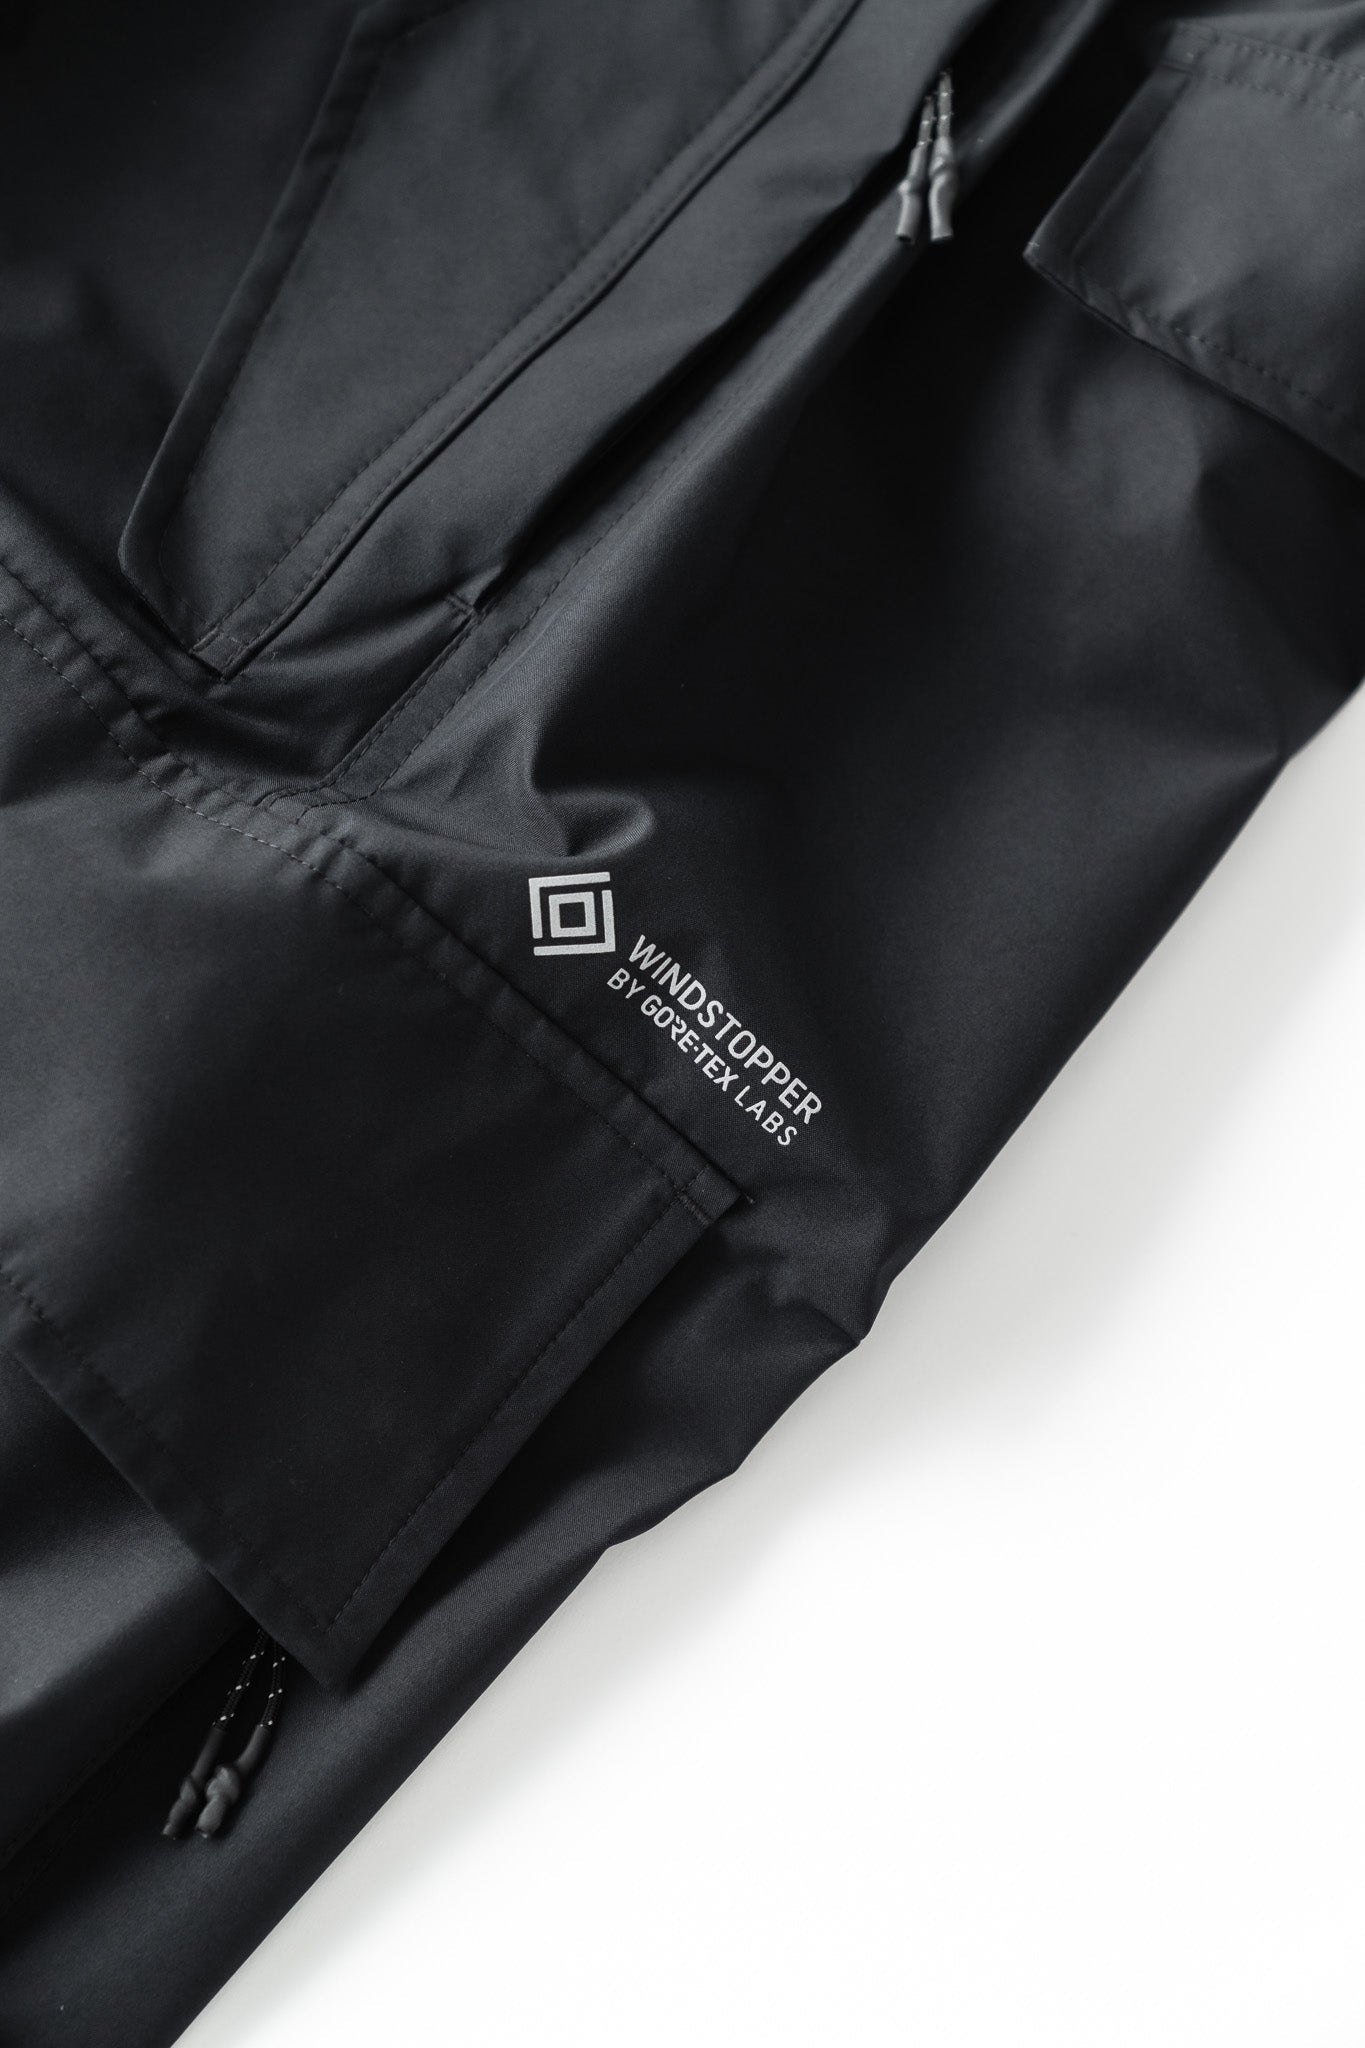 +phenix WINDSTOPPER® by GORE-TEX LABS CITY MILITARY PANTS.